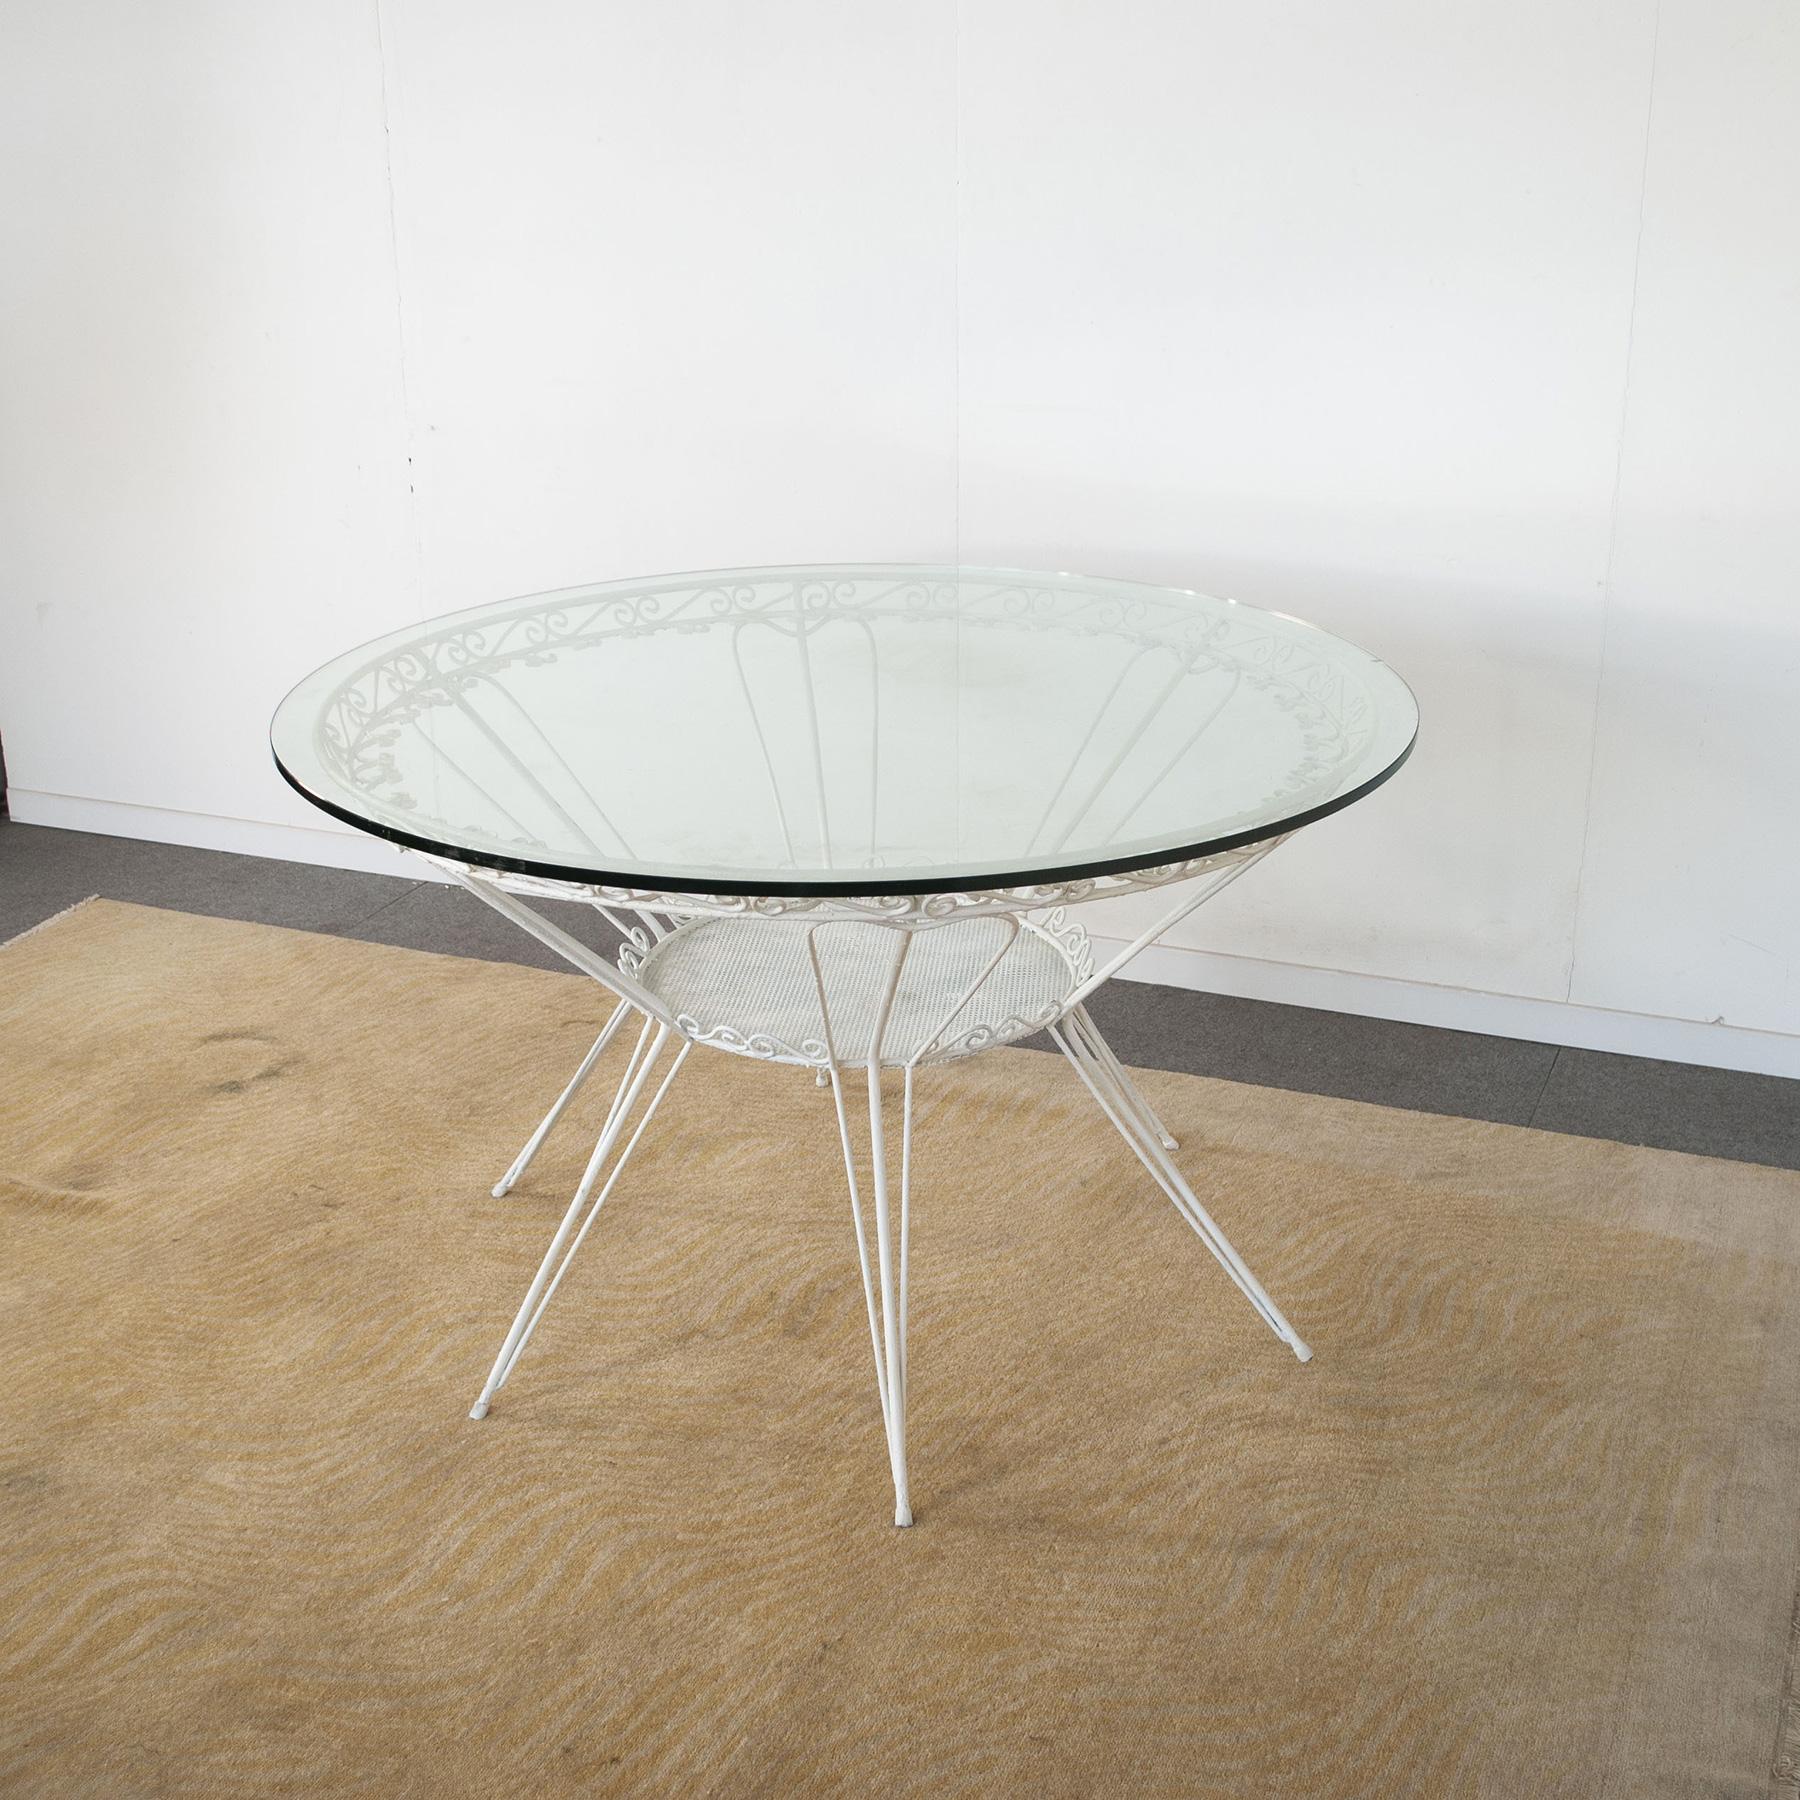 Gio Ponti Style Wrought Iron Table from the 1950s Casa E Giardino In Good Condition For Sale In bari, IT